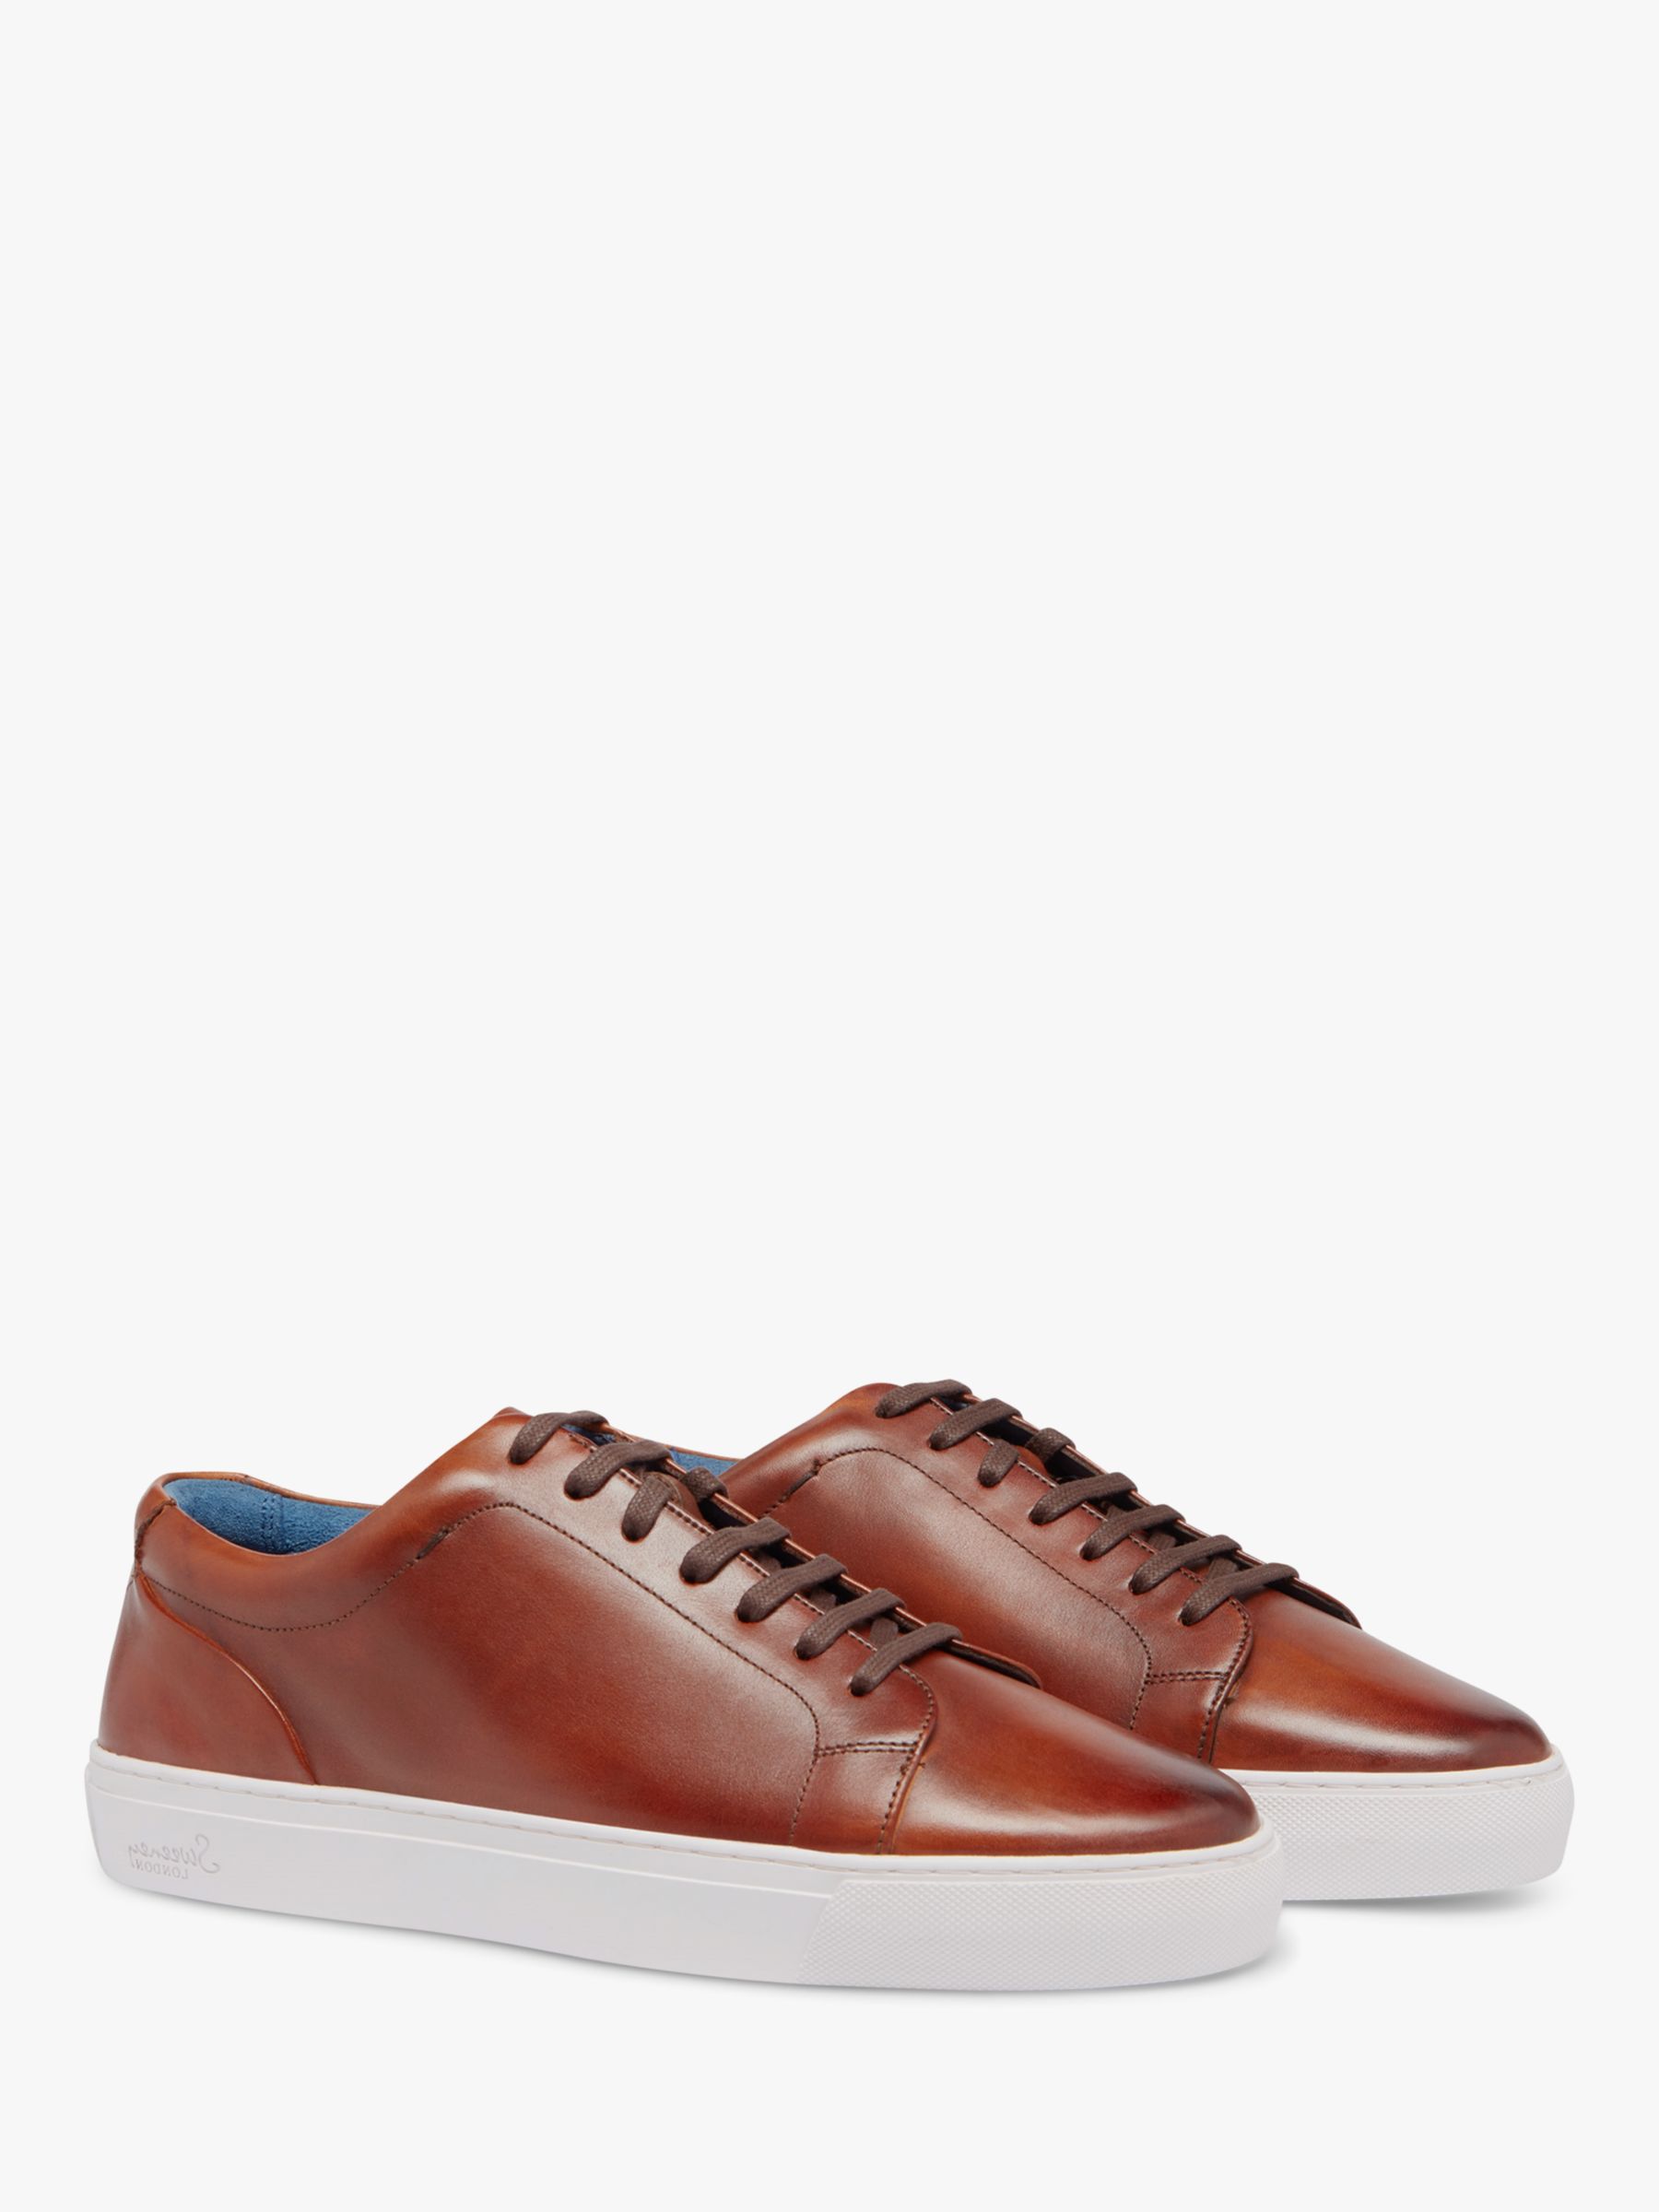 Buy Oliver Sweeney Hayle Leather Trainers Online at johnlewis.com